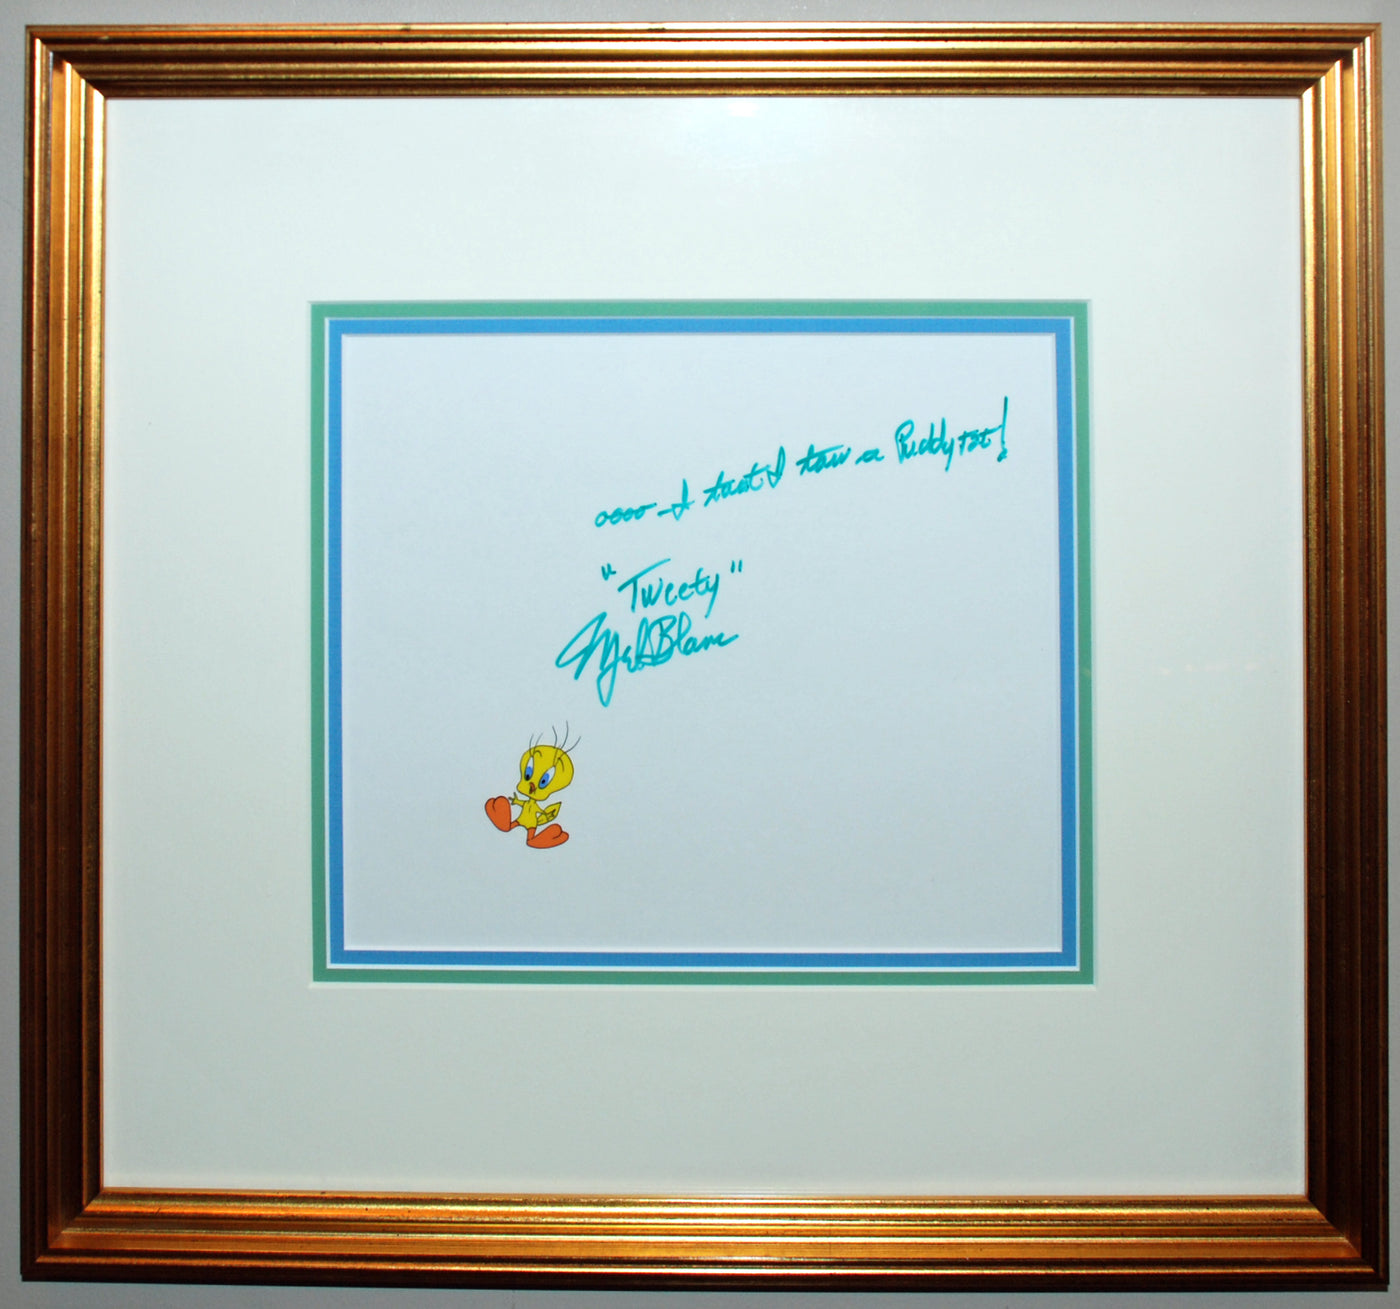 Warner Brothers Production Cel featuring Tweety, Signed and Inscribed by Mel Blanc